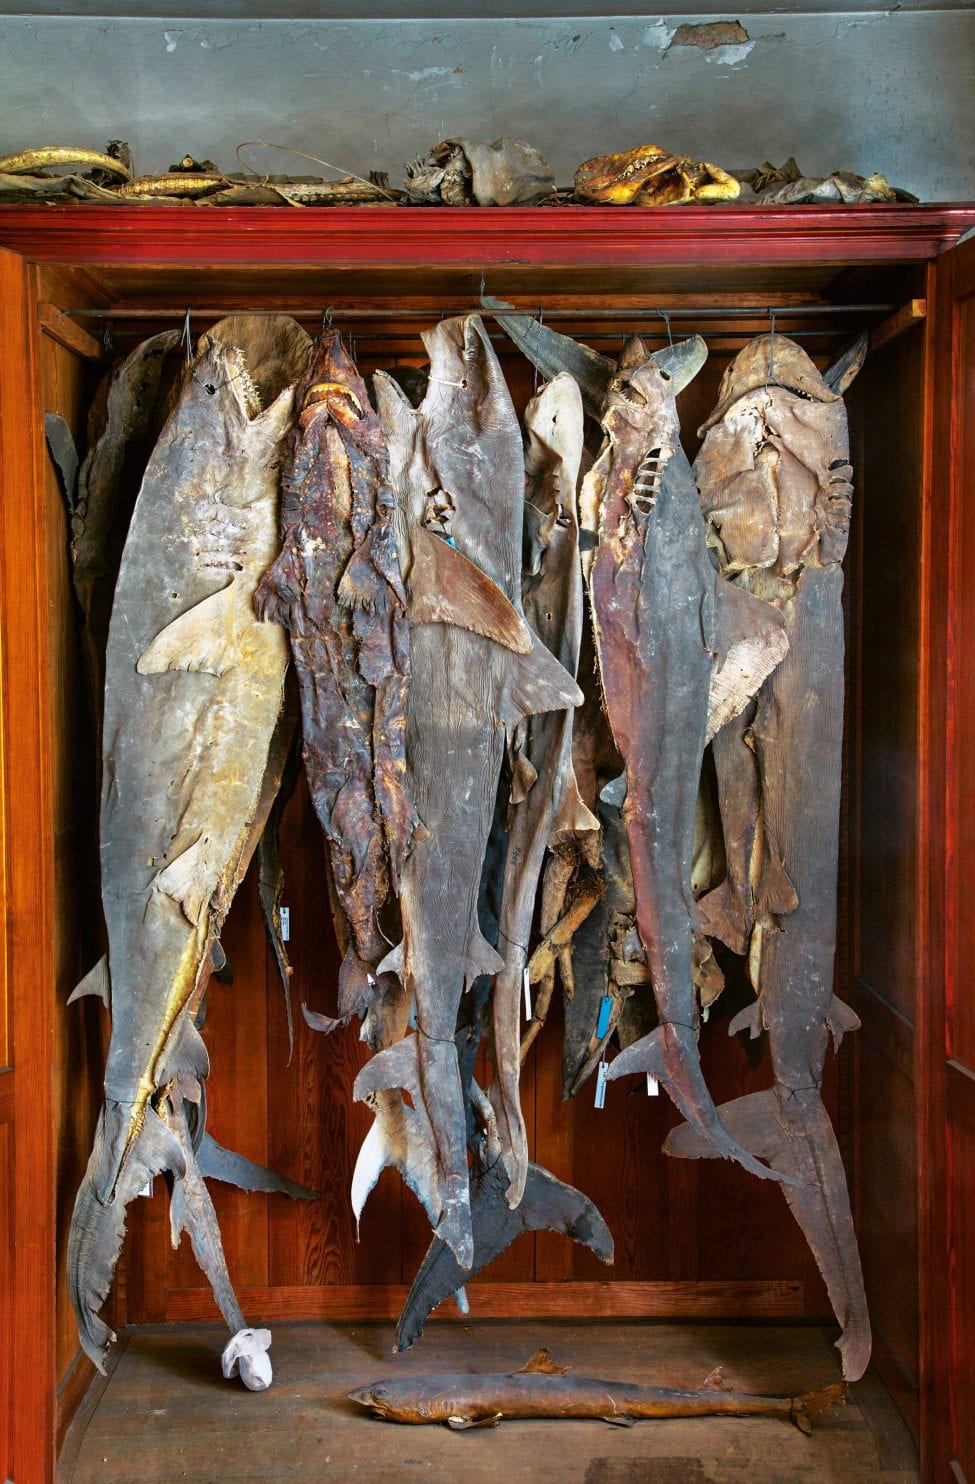 'Type specimens', like these shark skins from the 18th and 19th centuries in Berlin, Germany, are often samples stored in natural history museums. They form the basis on which taxonomists describe and name species.<br />
Photo by Gerd Ludwig | National Geographic Image Collection